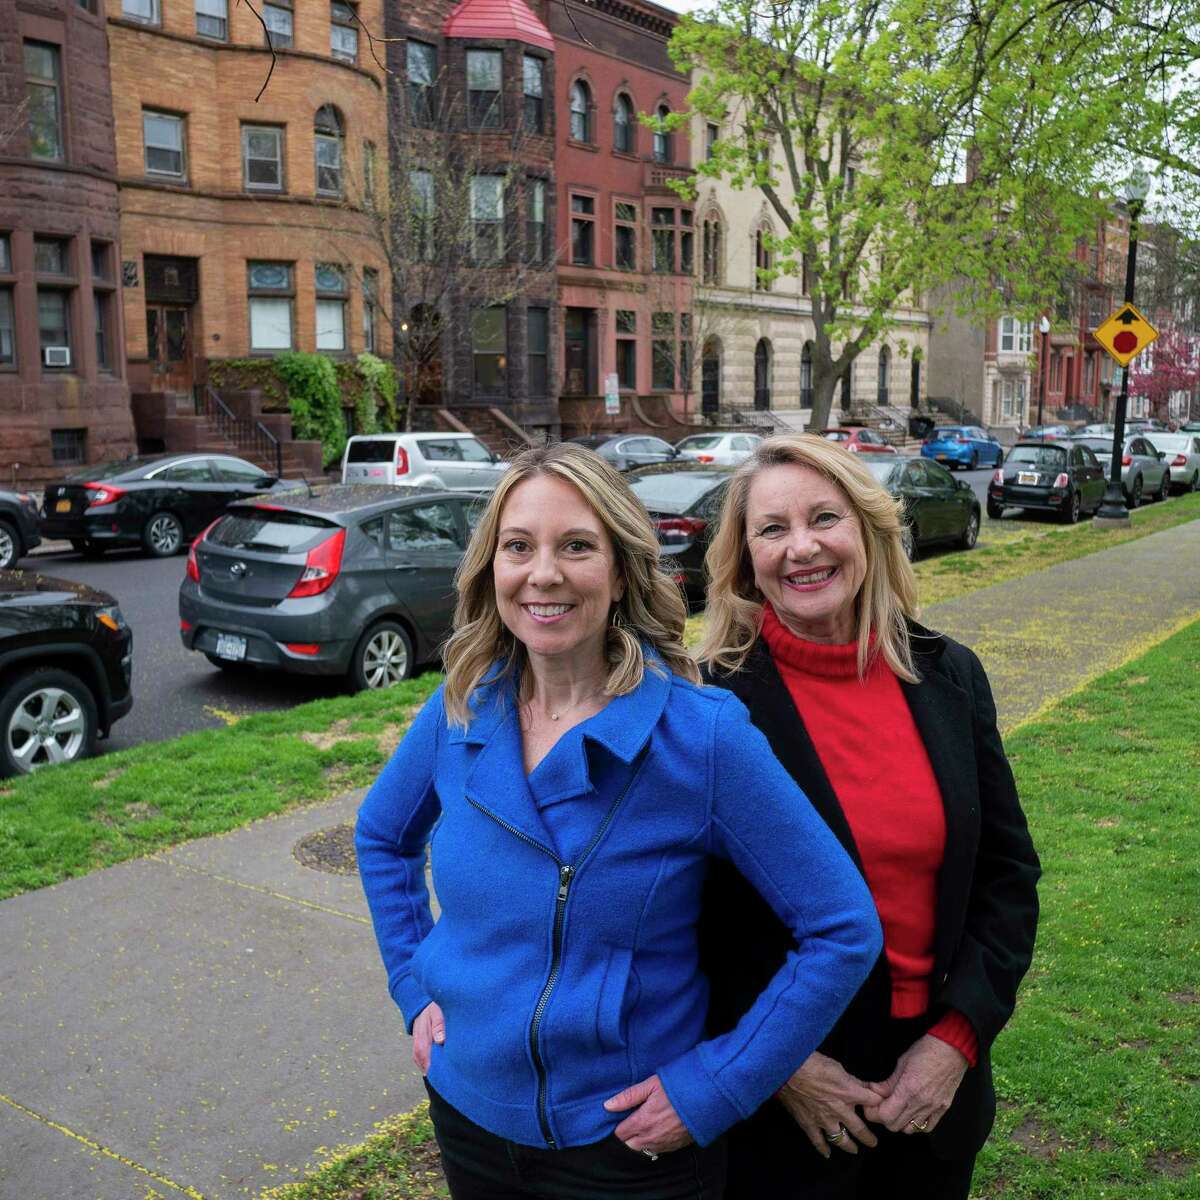 Nicole Wilkie, left, and her mom, Joyce Brown, both licensed agents with eRealty Advisors, pose for a photo in Washington Park on Wednesday, May 4, 2022, in Albany, N.Y. (Paul Buckowski/Times Union)